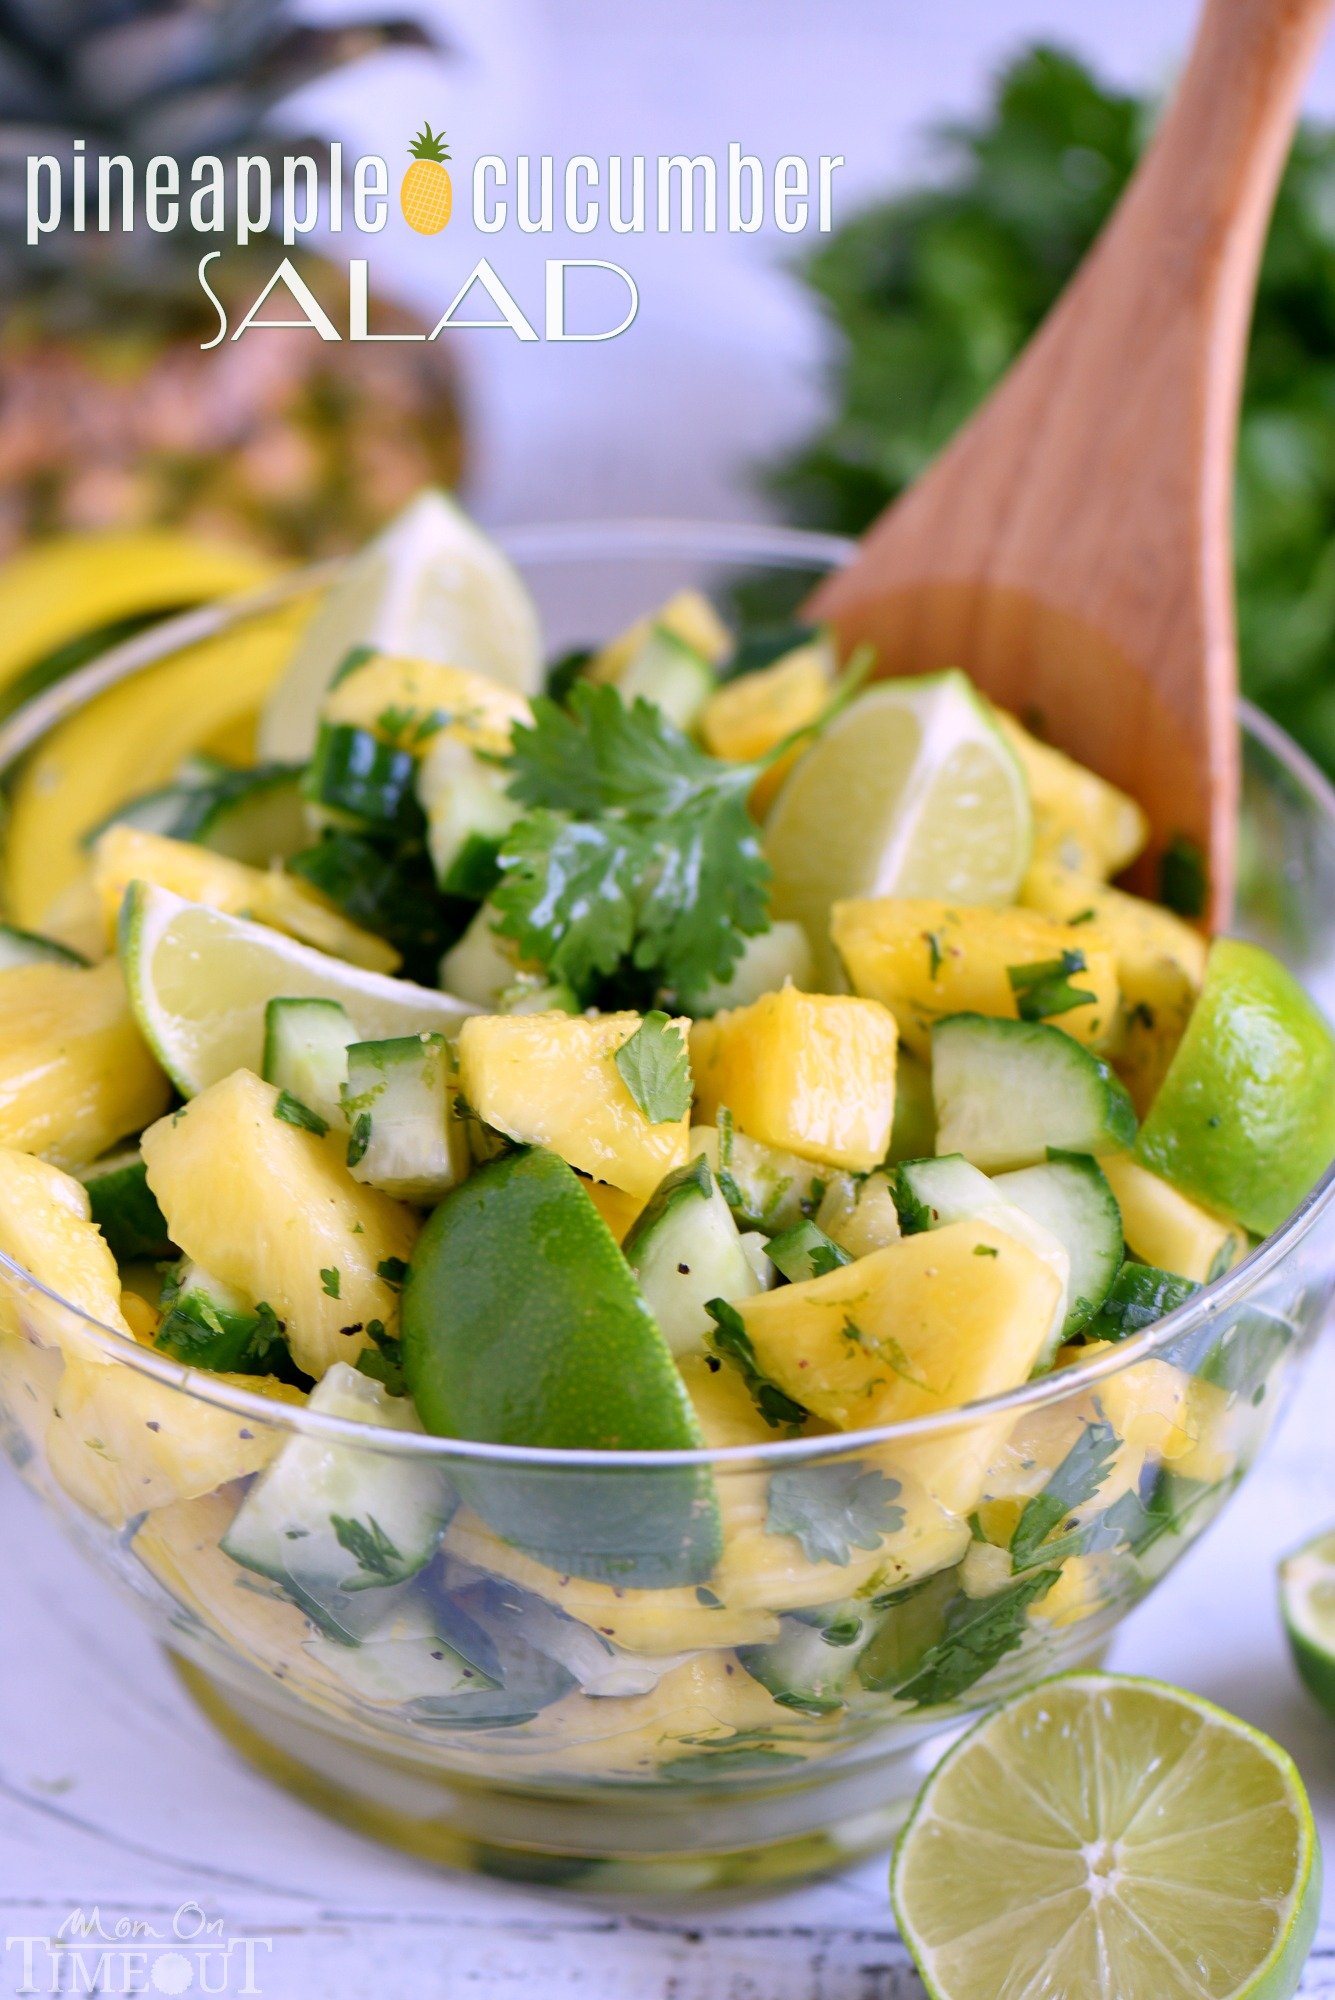 This perfectly refreshing Pineapple Cucumber Salad is wonderfully easy to make and simply delicious! Great for summer BBQs, parties, potlucks and more! // Mom On Timeout